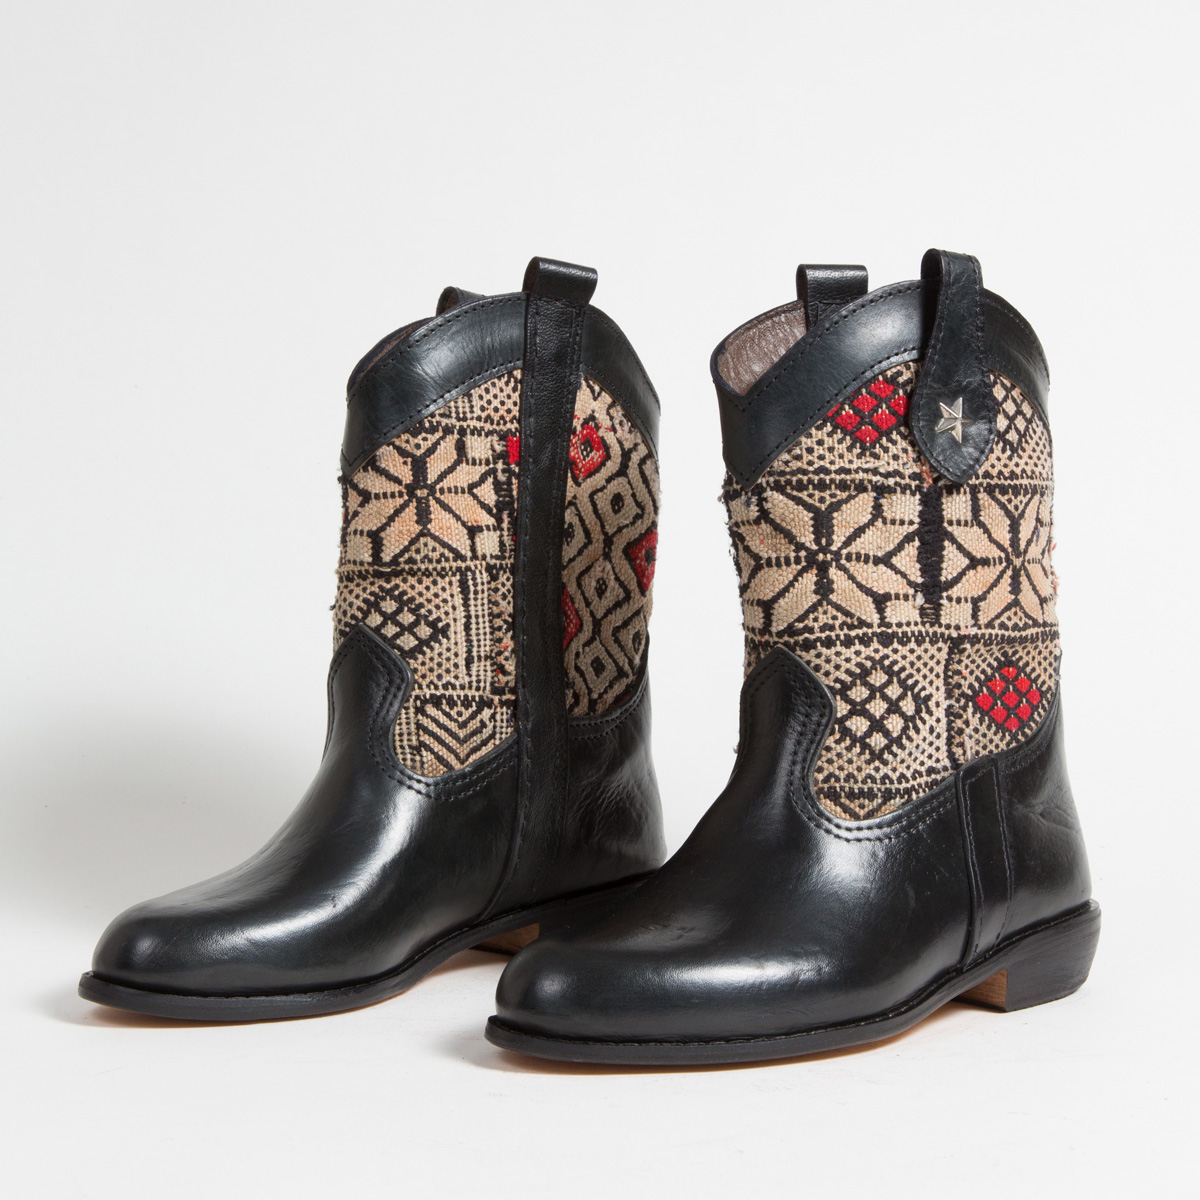 Bottines Kilim cuir mababouche artisanales (Réf. MN6-38)